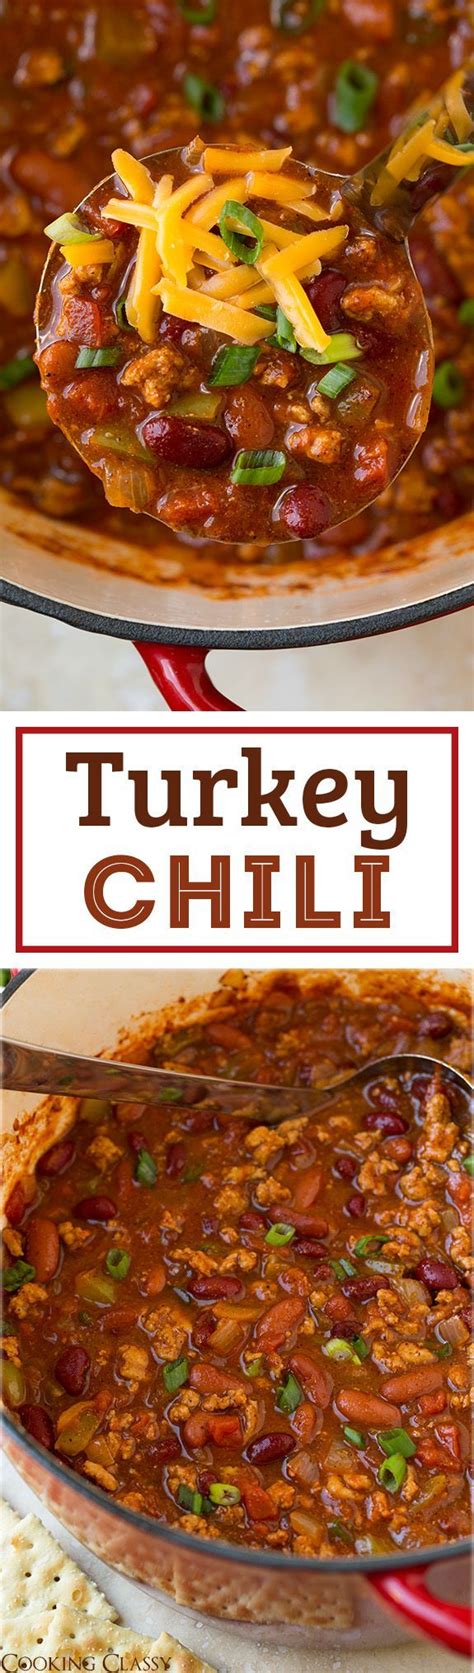 Turkey Chili A Lighter Chili That Tastes Just As Good As The Beefy